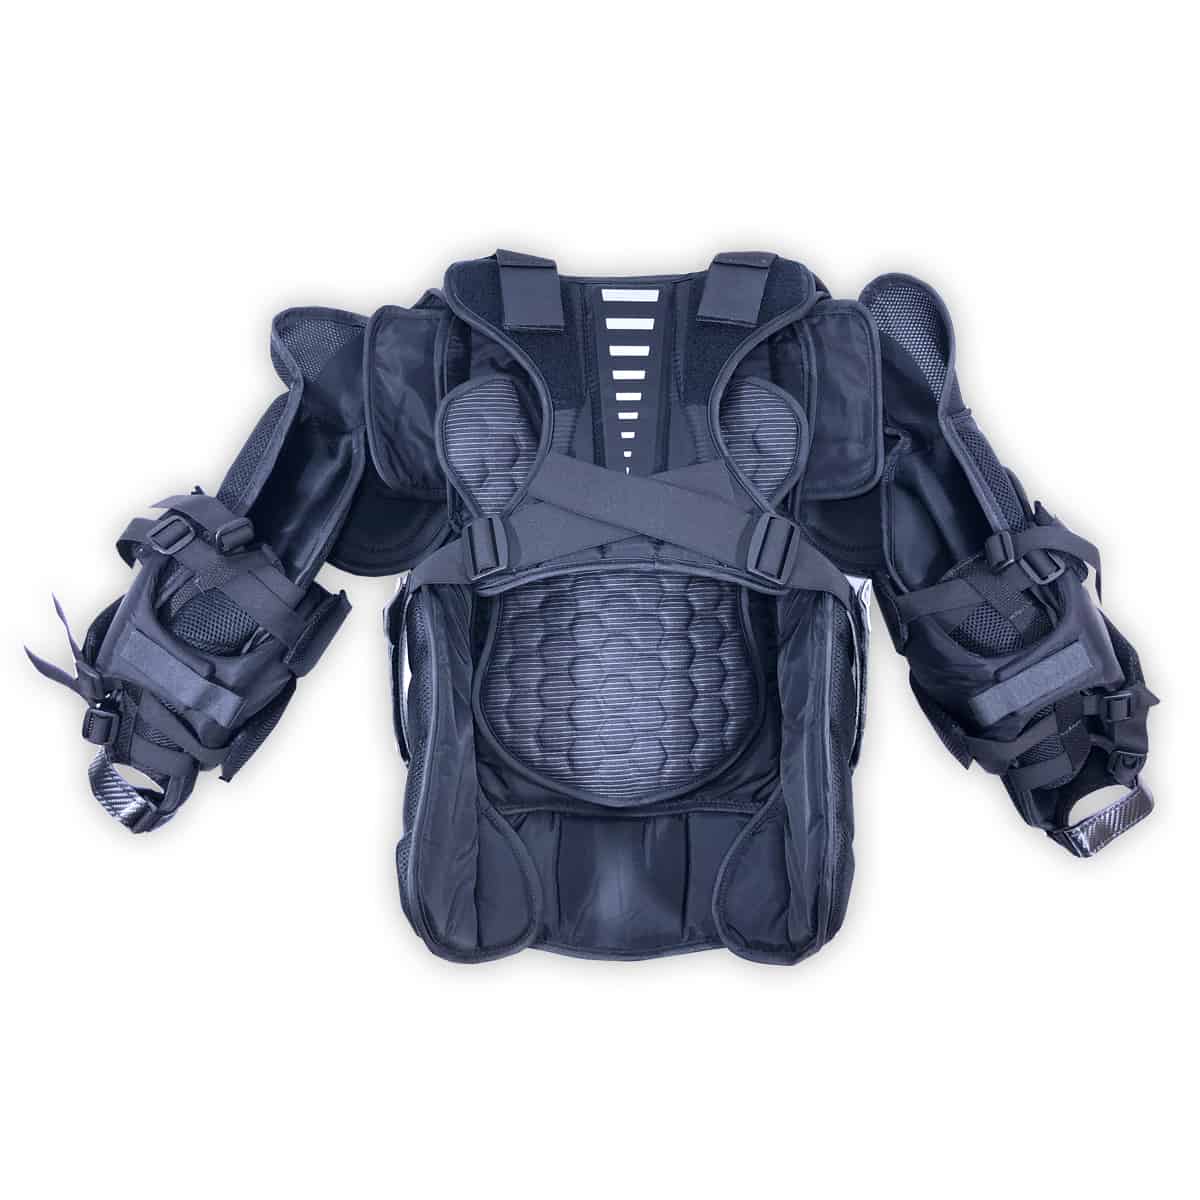 brian's chest protector